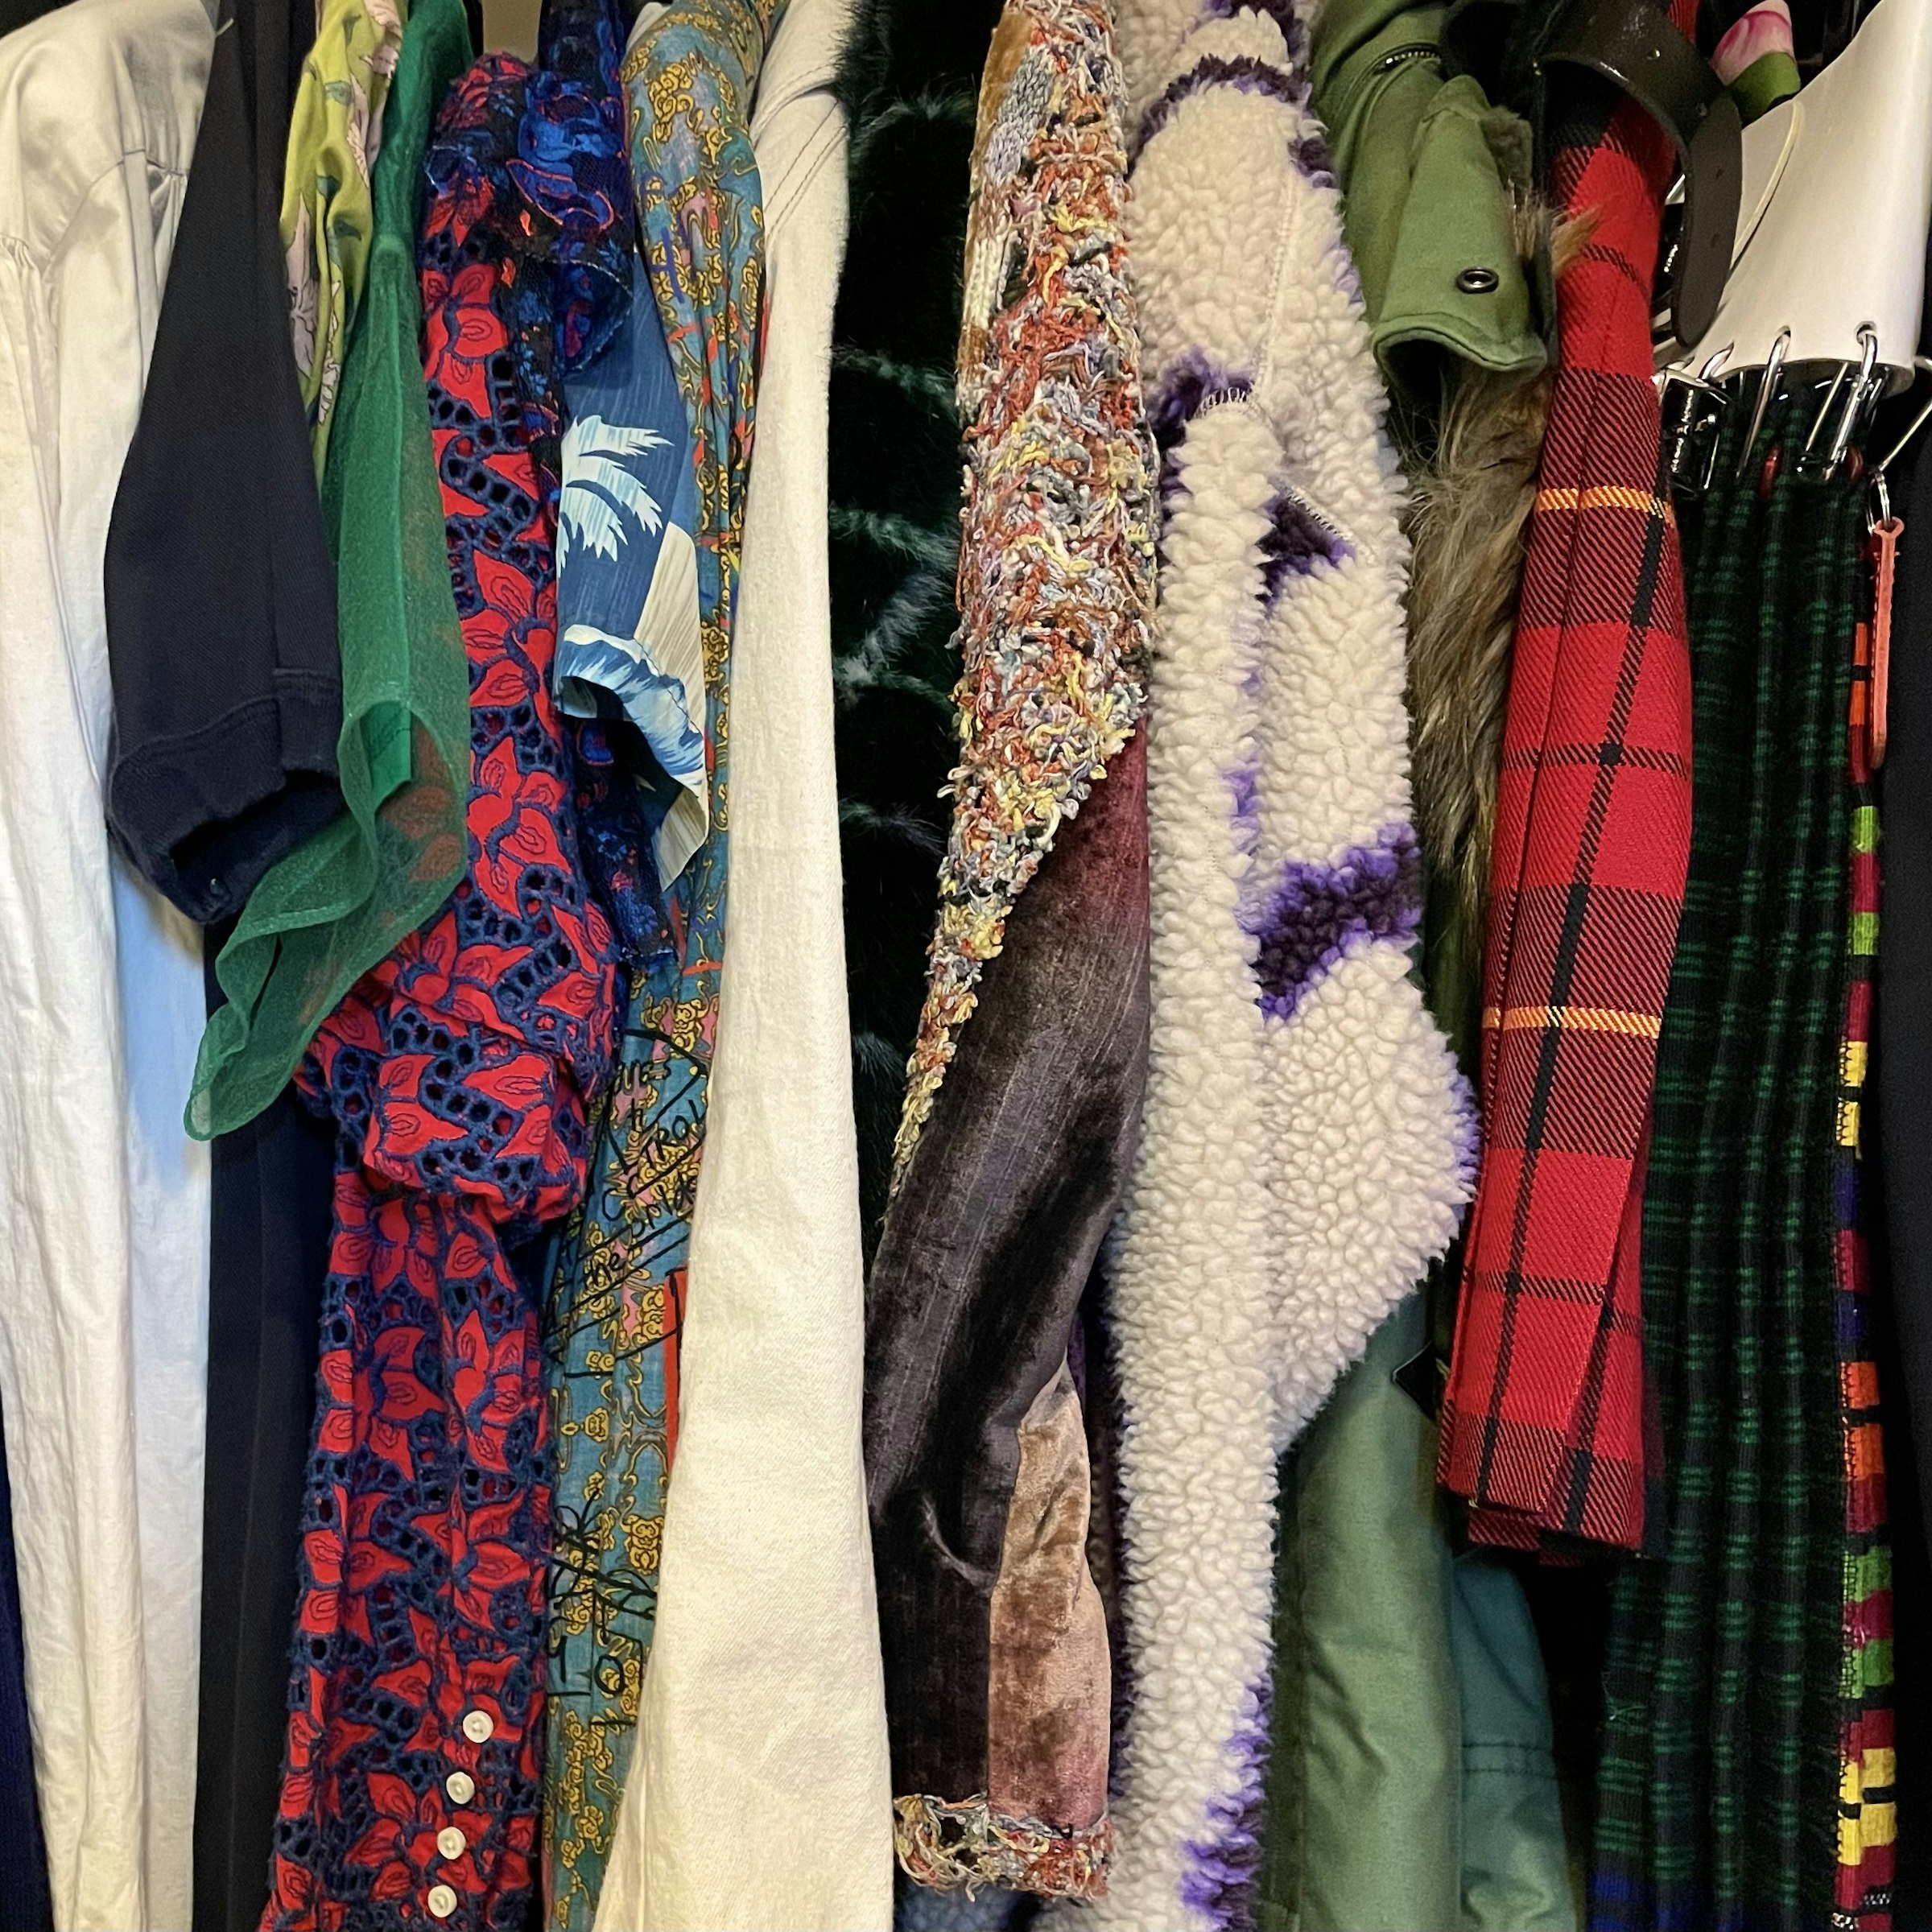 Part of the closet. Generally, items with patterns are fewer